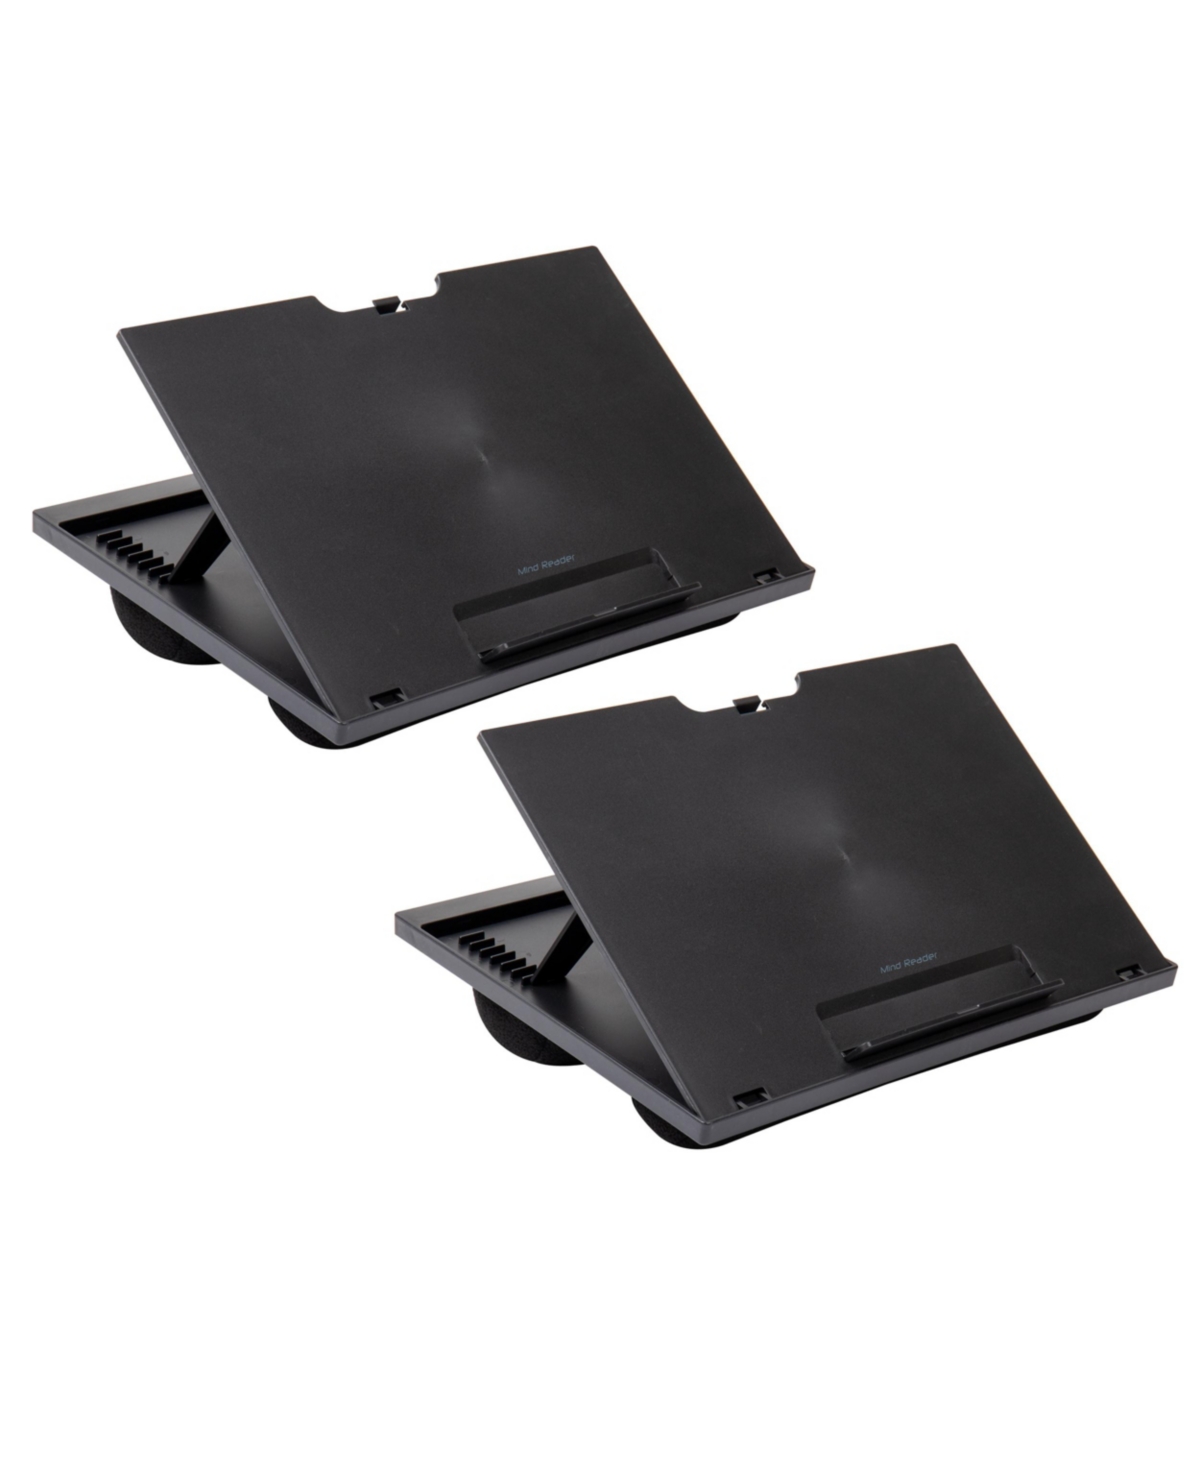 Adjustable Laptop Desk with Built-in Cushions, Set of 2 - Black